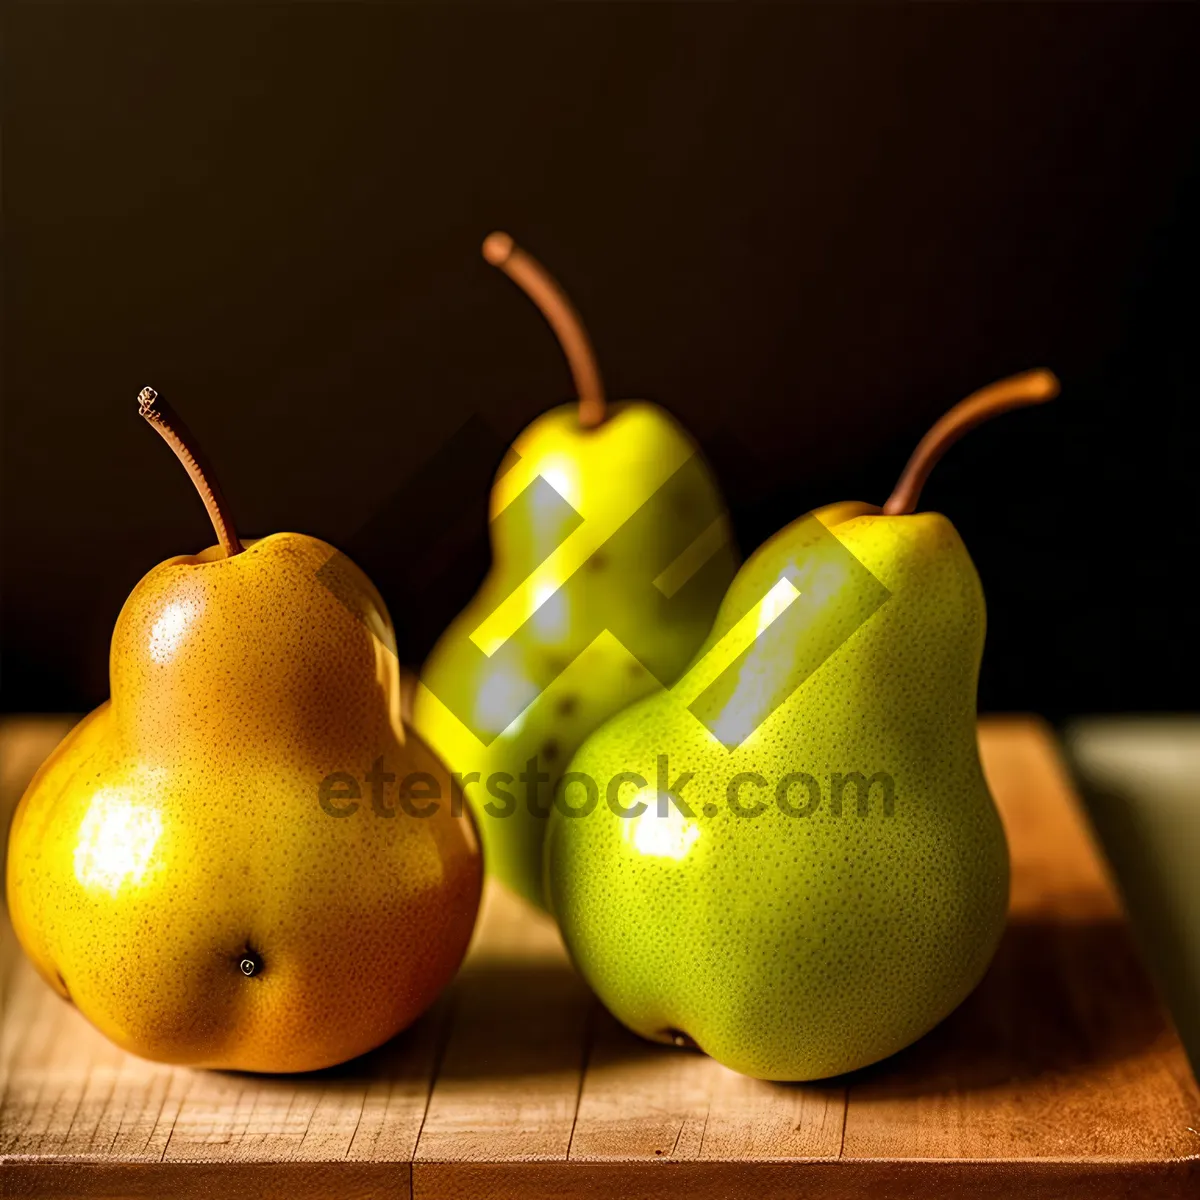 Picture of Juicy Yellow Pear - Fresh and Nutritious Edible Fruit